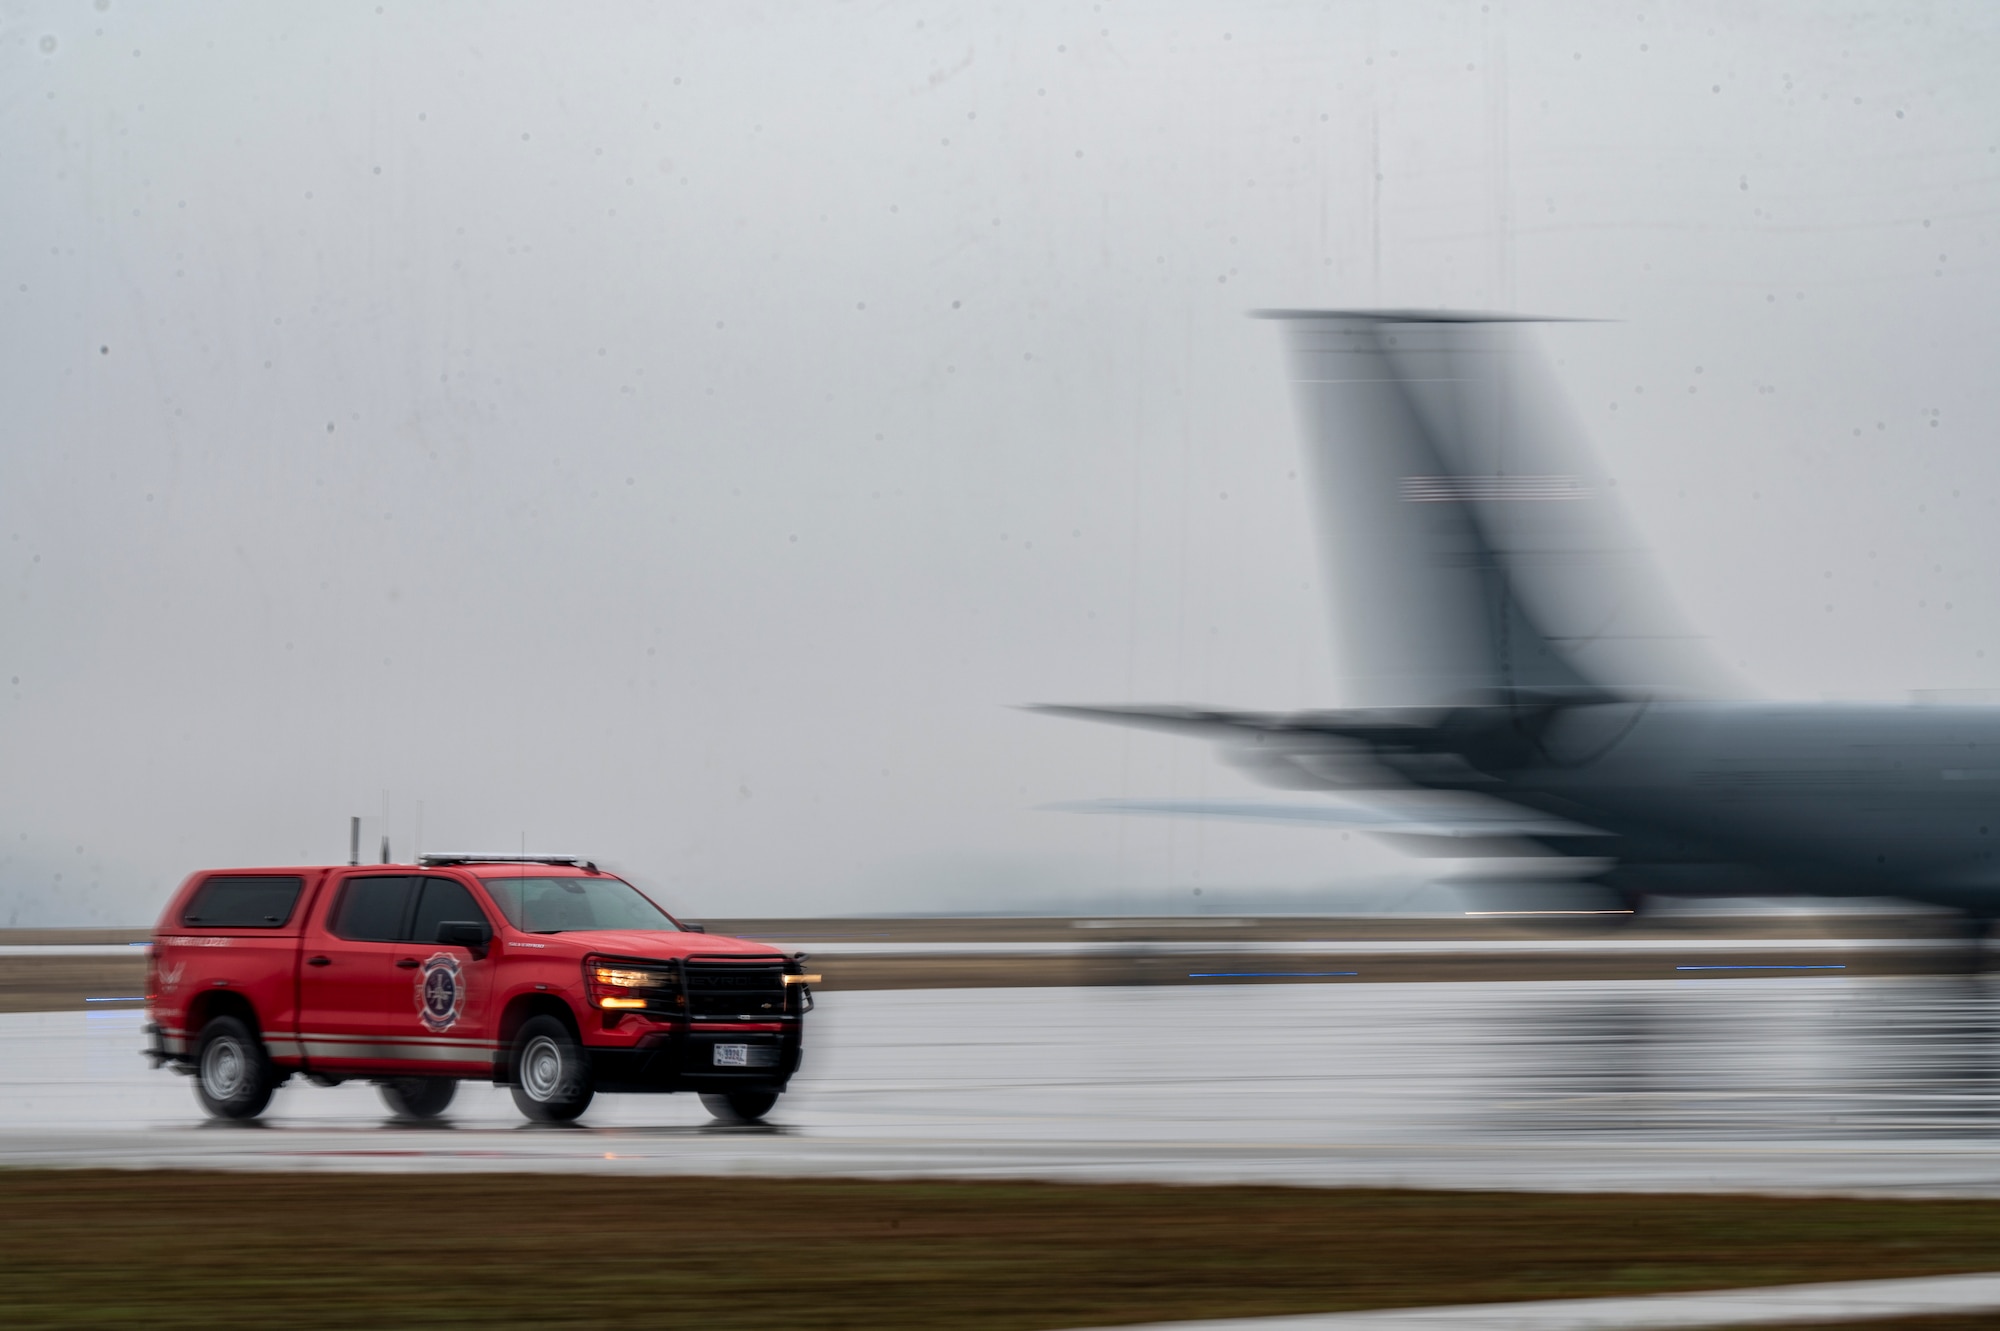 A response vehicle drives on the flightline